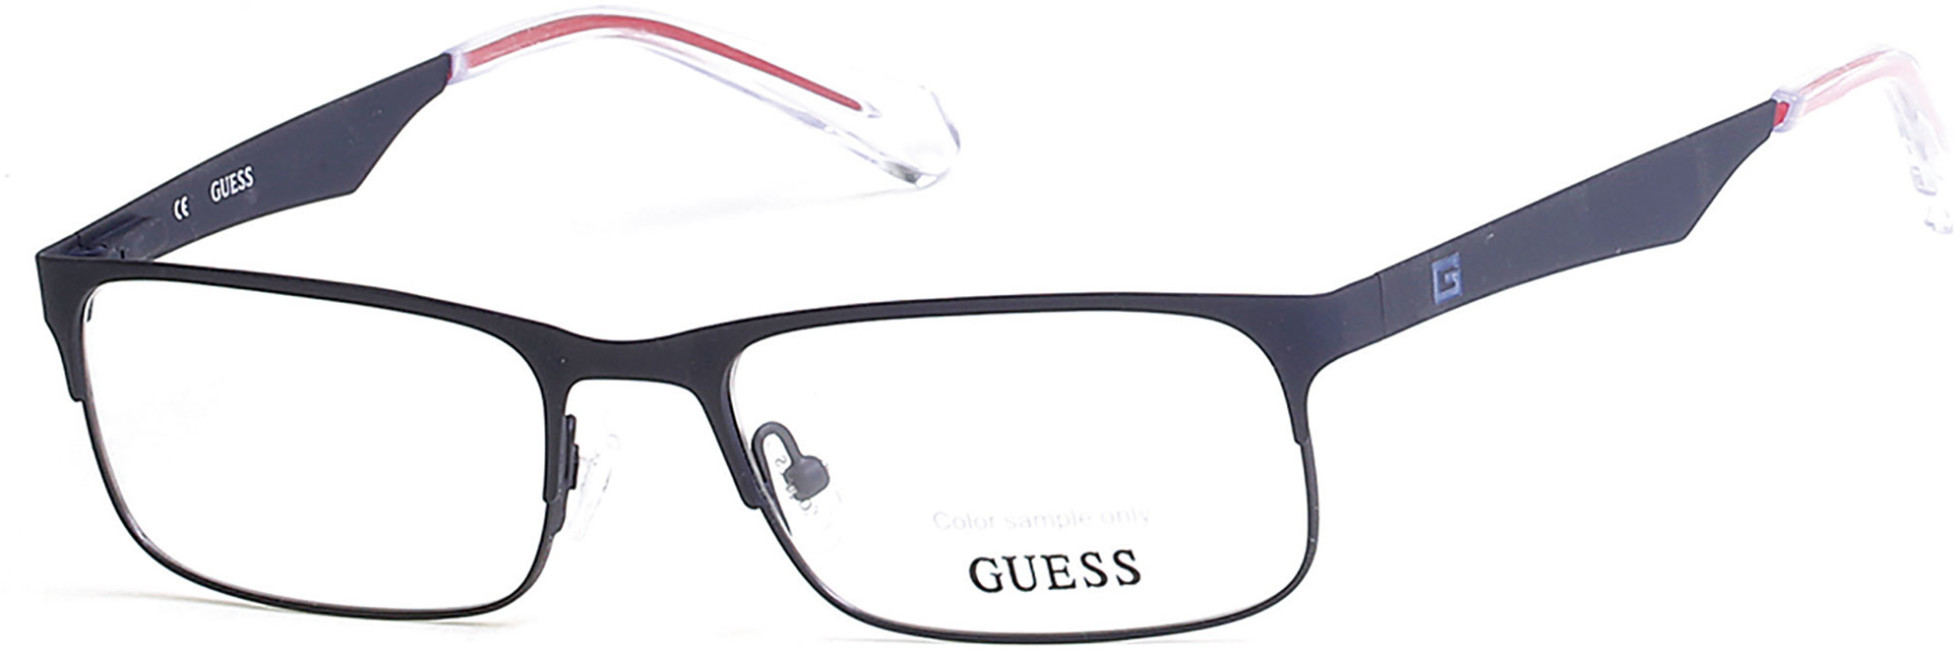 GUESS 1904 091